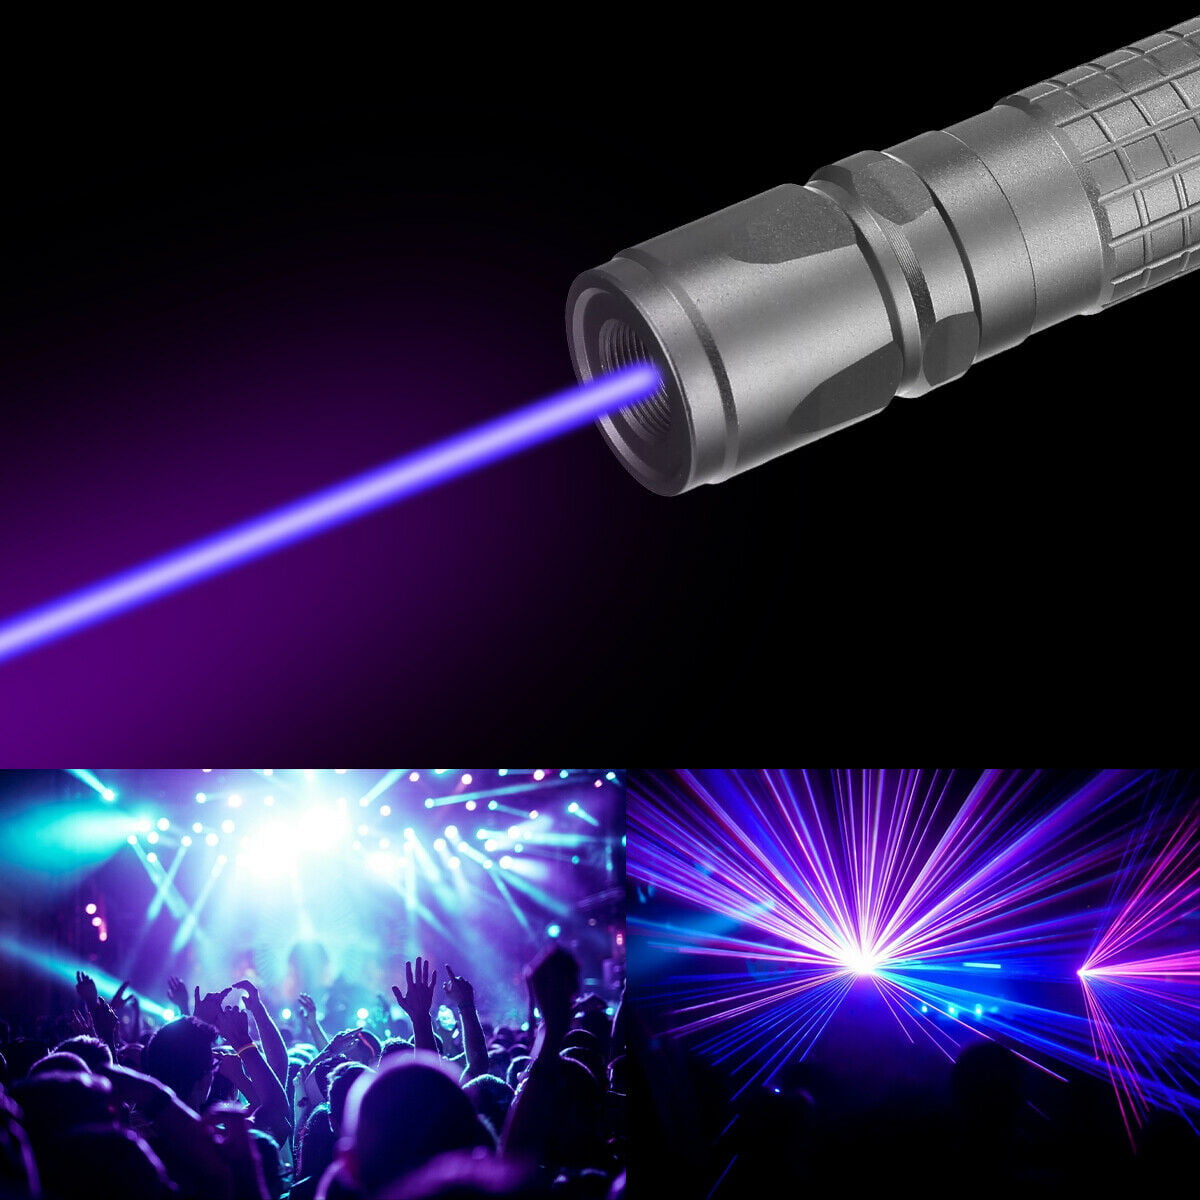 Pack of 2 Blue Purple Laser Pointer Pen 900 Miles Zoom Beam Lazer+18650+Charger 